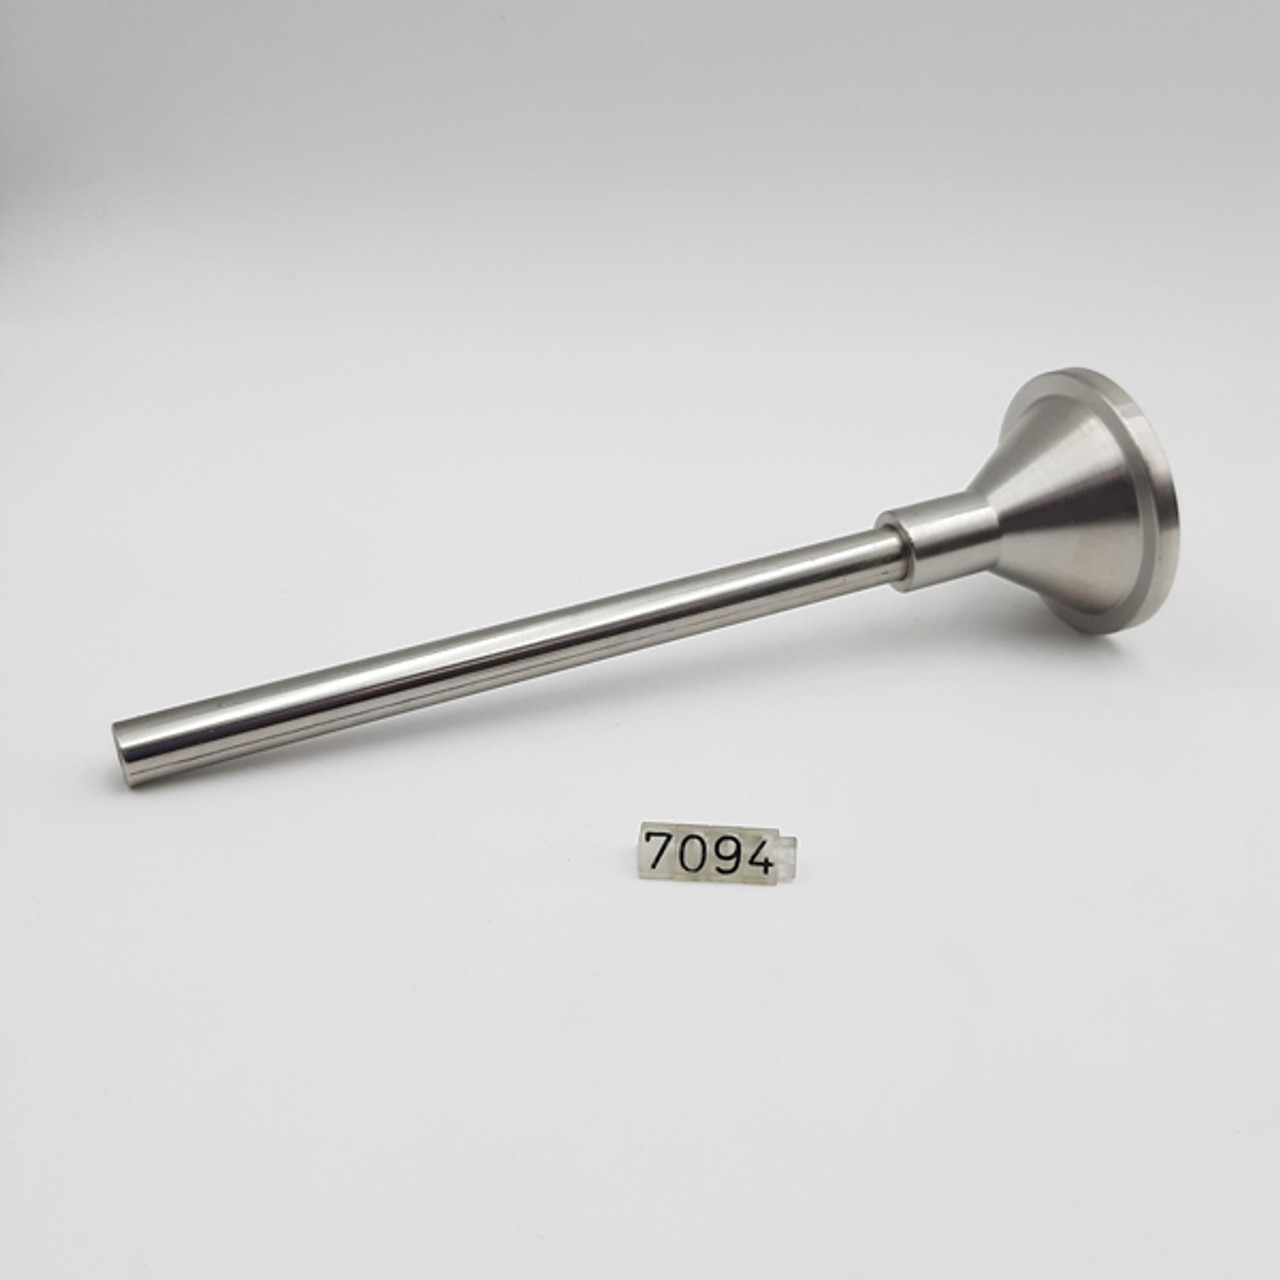 Talsa H-203 - 12mm Stainless Steel Funnel - Long Funnel 6-1/4" - 7094